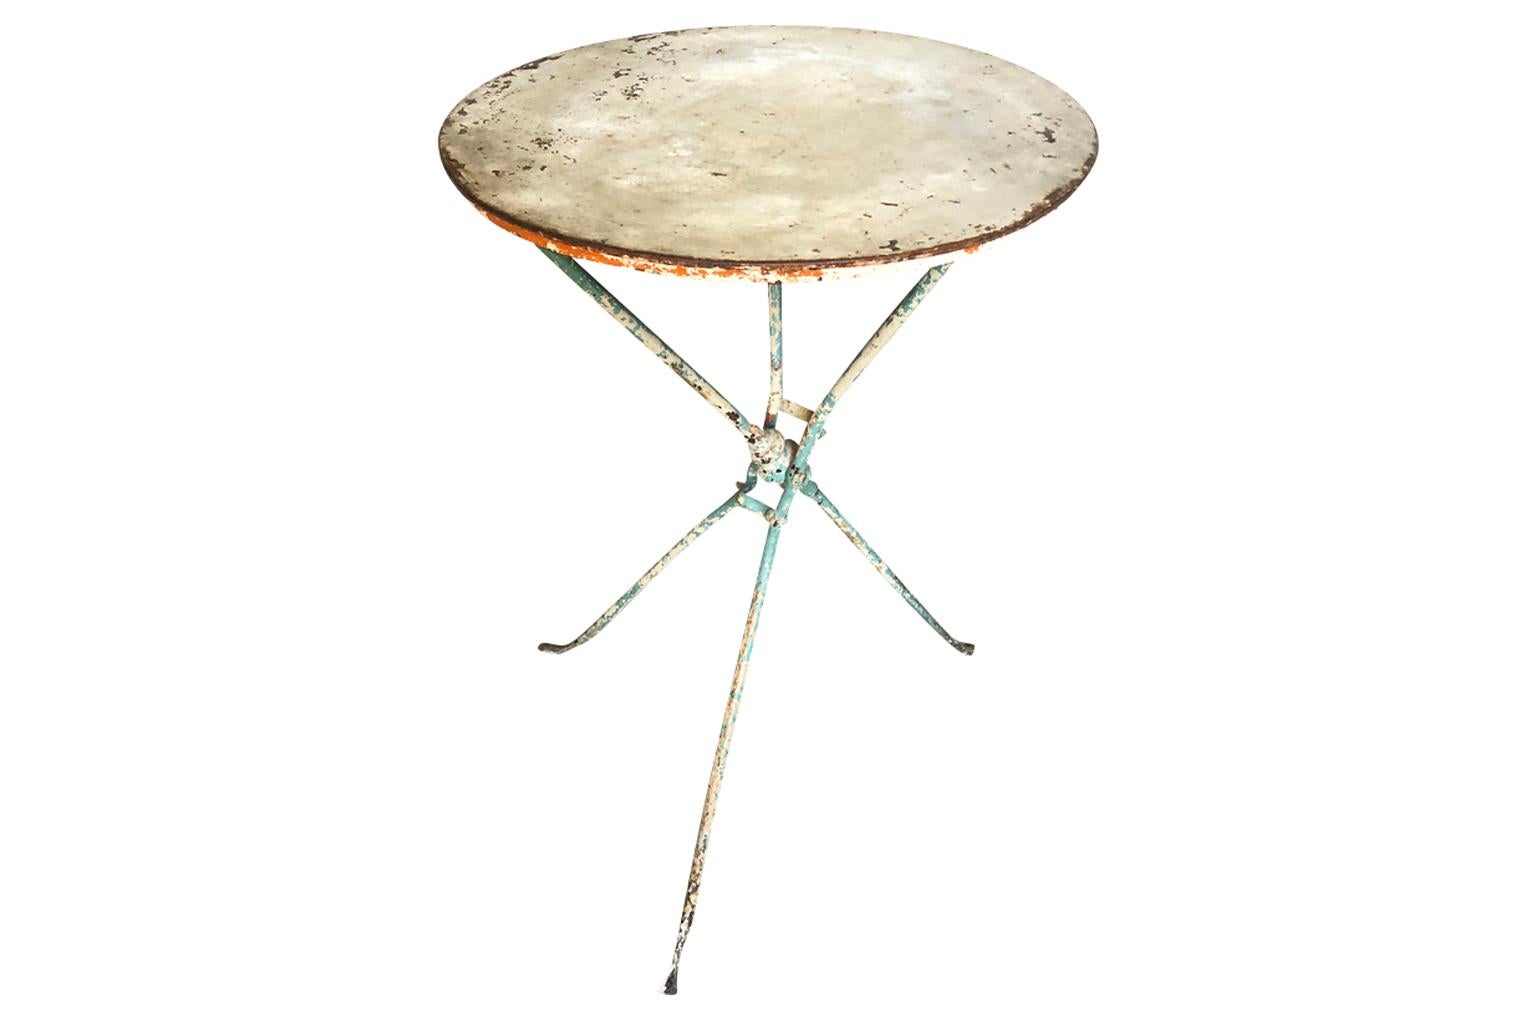 A delightful 19th century collapsible Bistro Table from the South of France in painted iron. Terrific patina. Perfect for any casual interior or exterior.